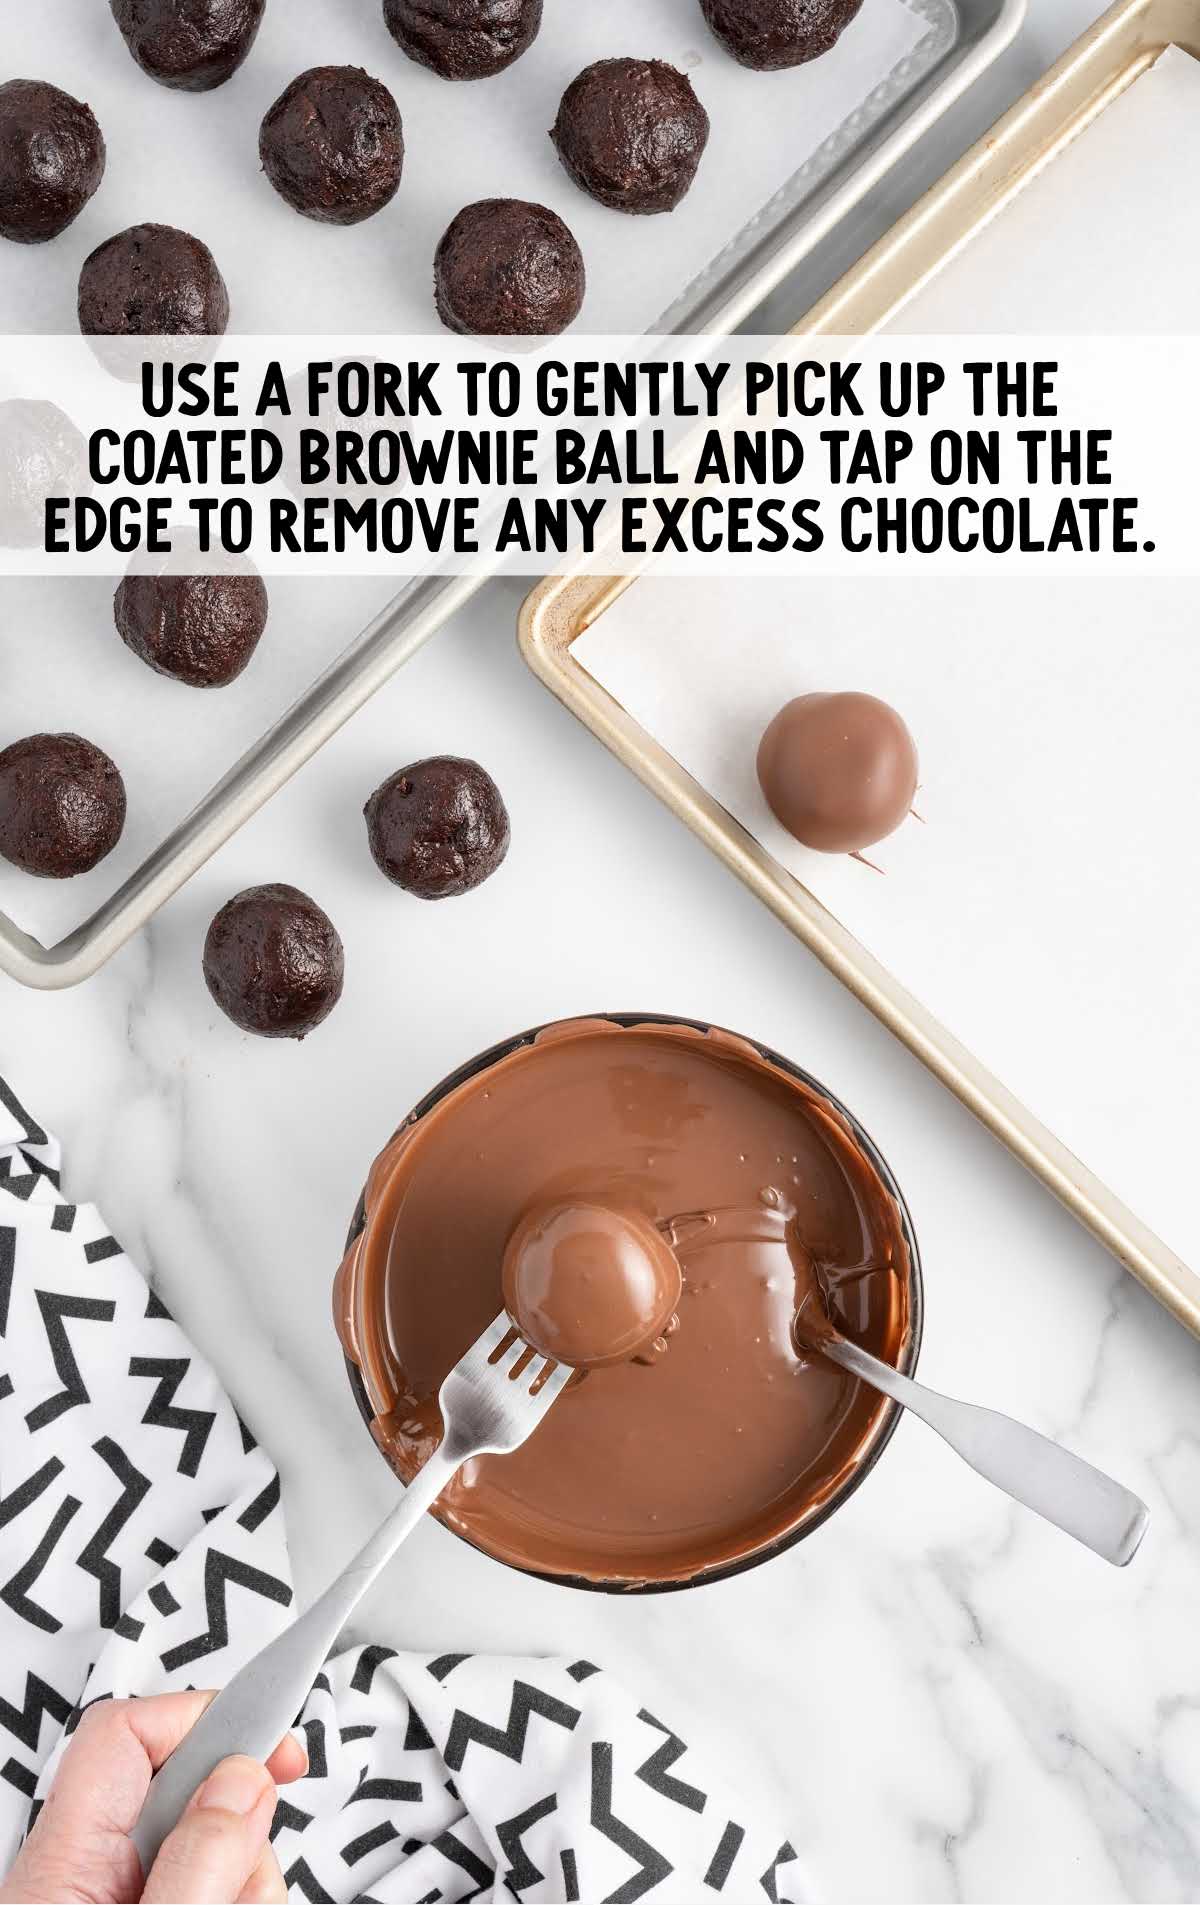 brownie ball dipped into a bowl of melted chocolate than picked up with a fork